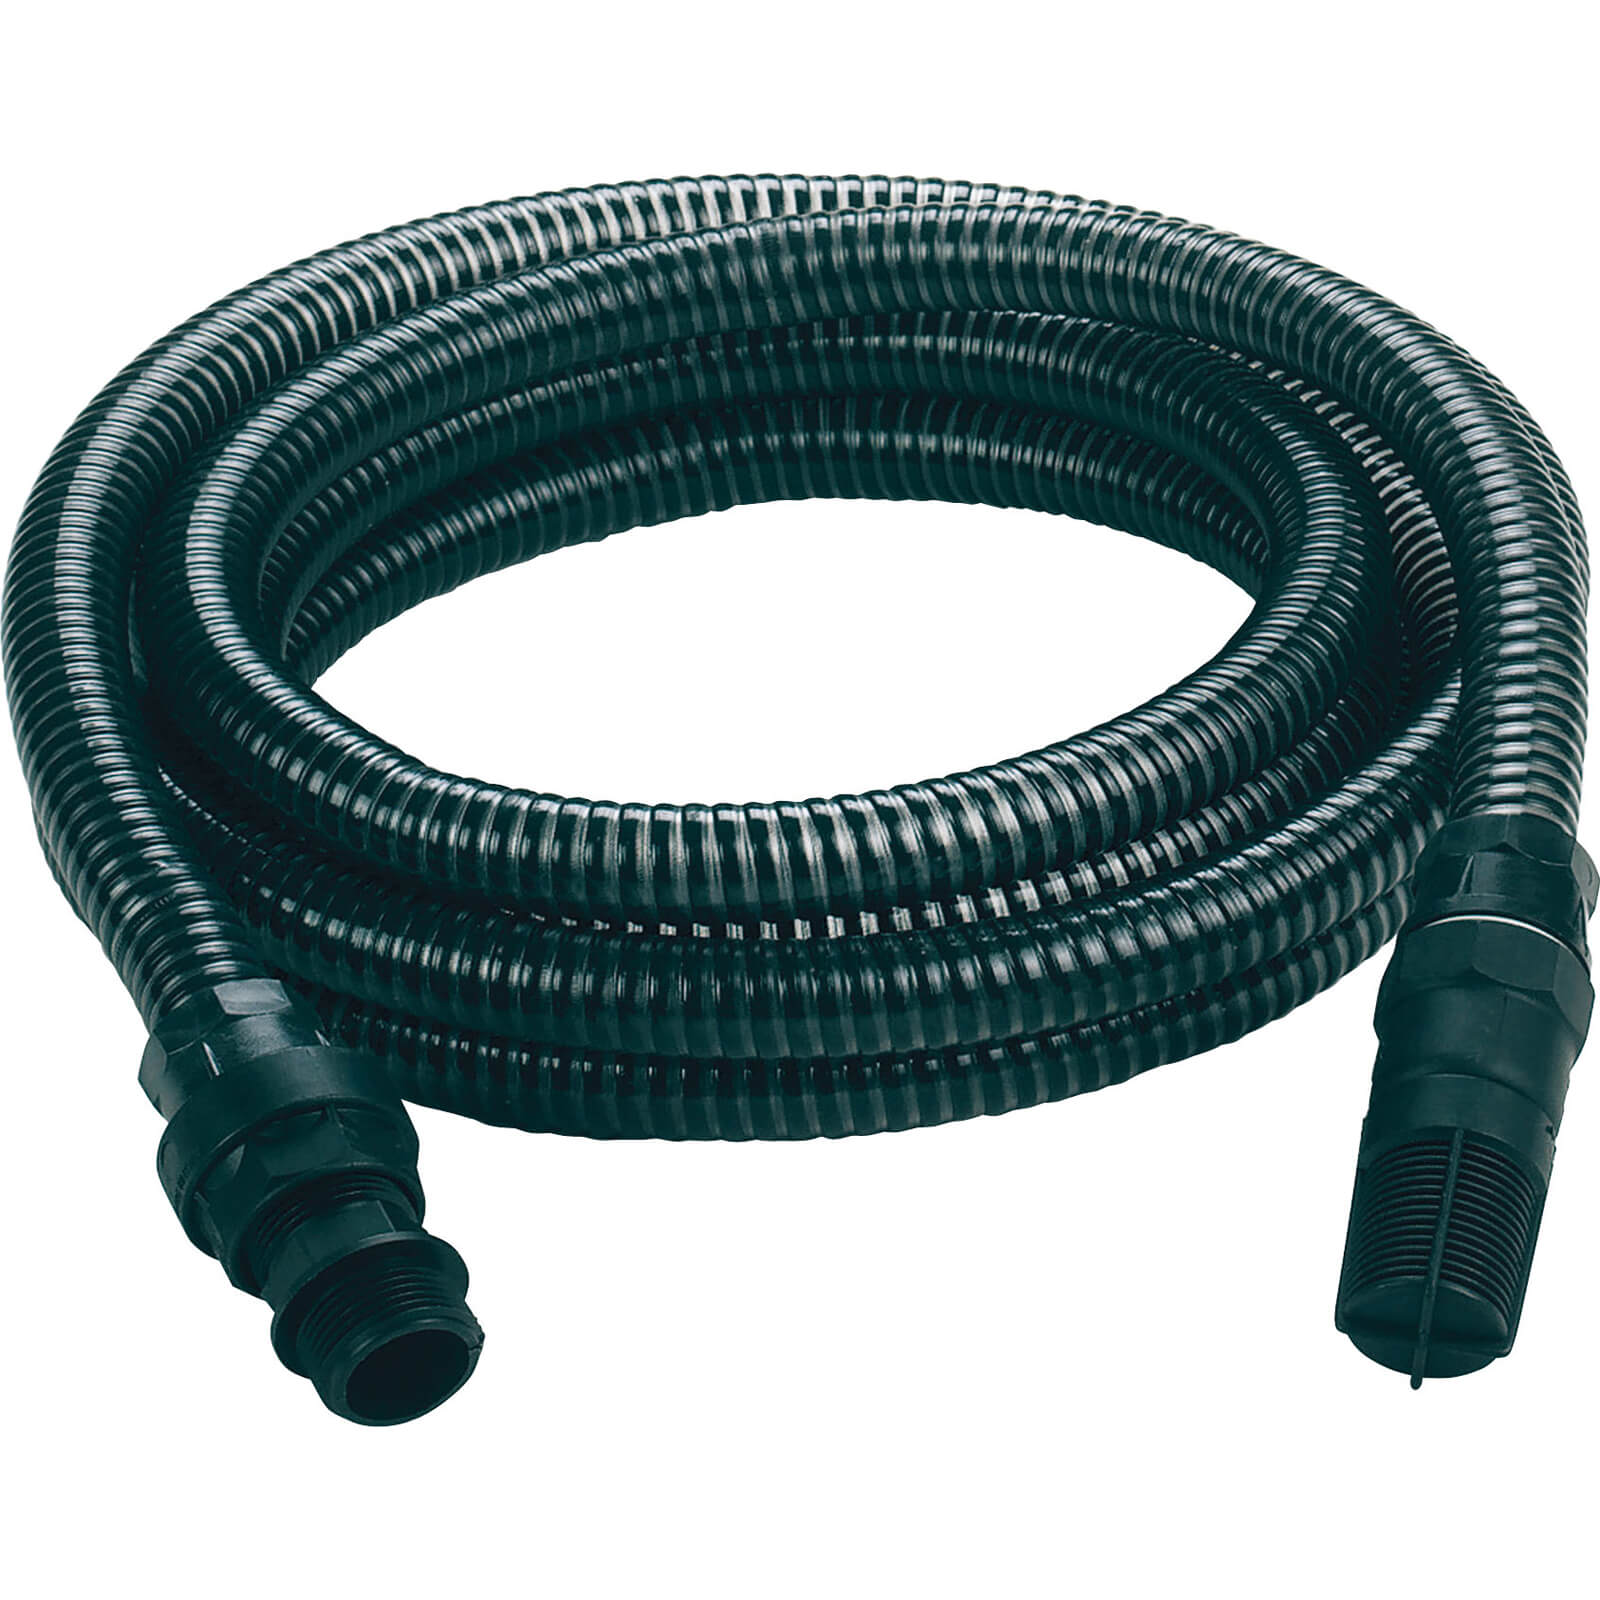 Image of Einhell Suction Hose for Water Pumps 25mm 4m